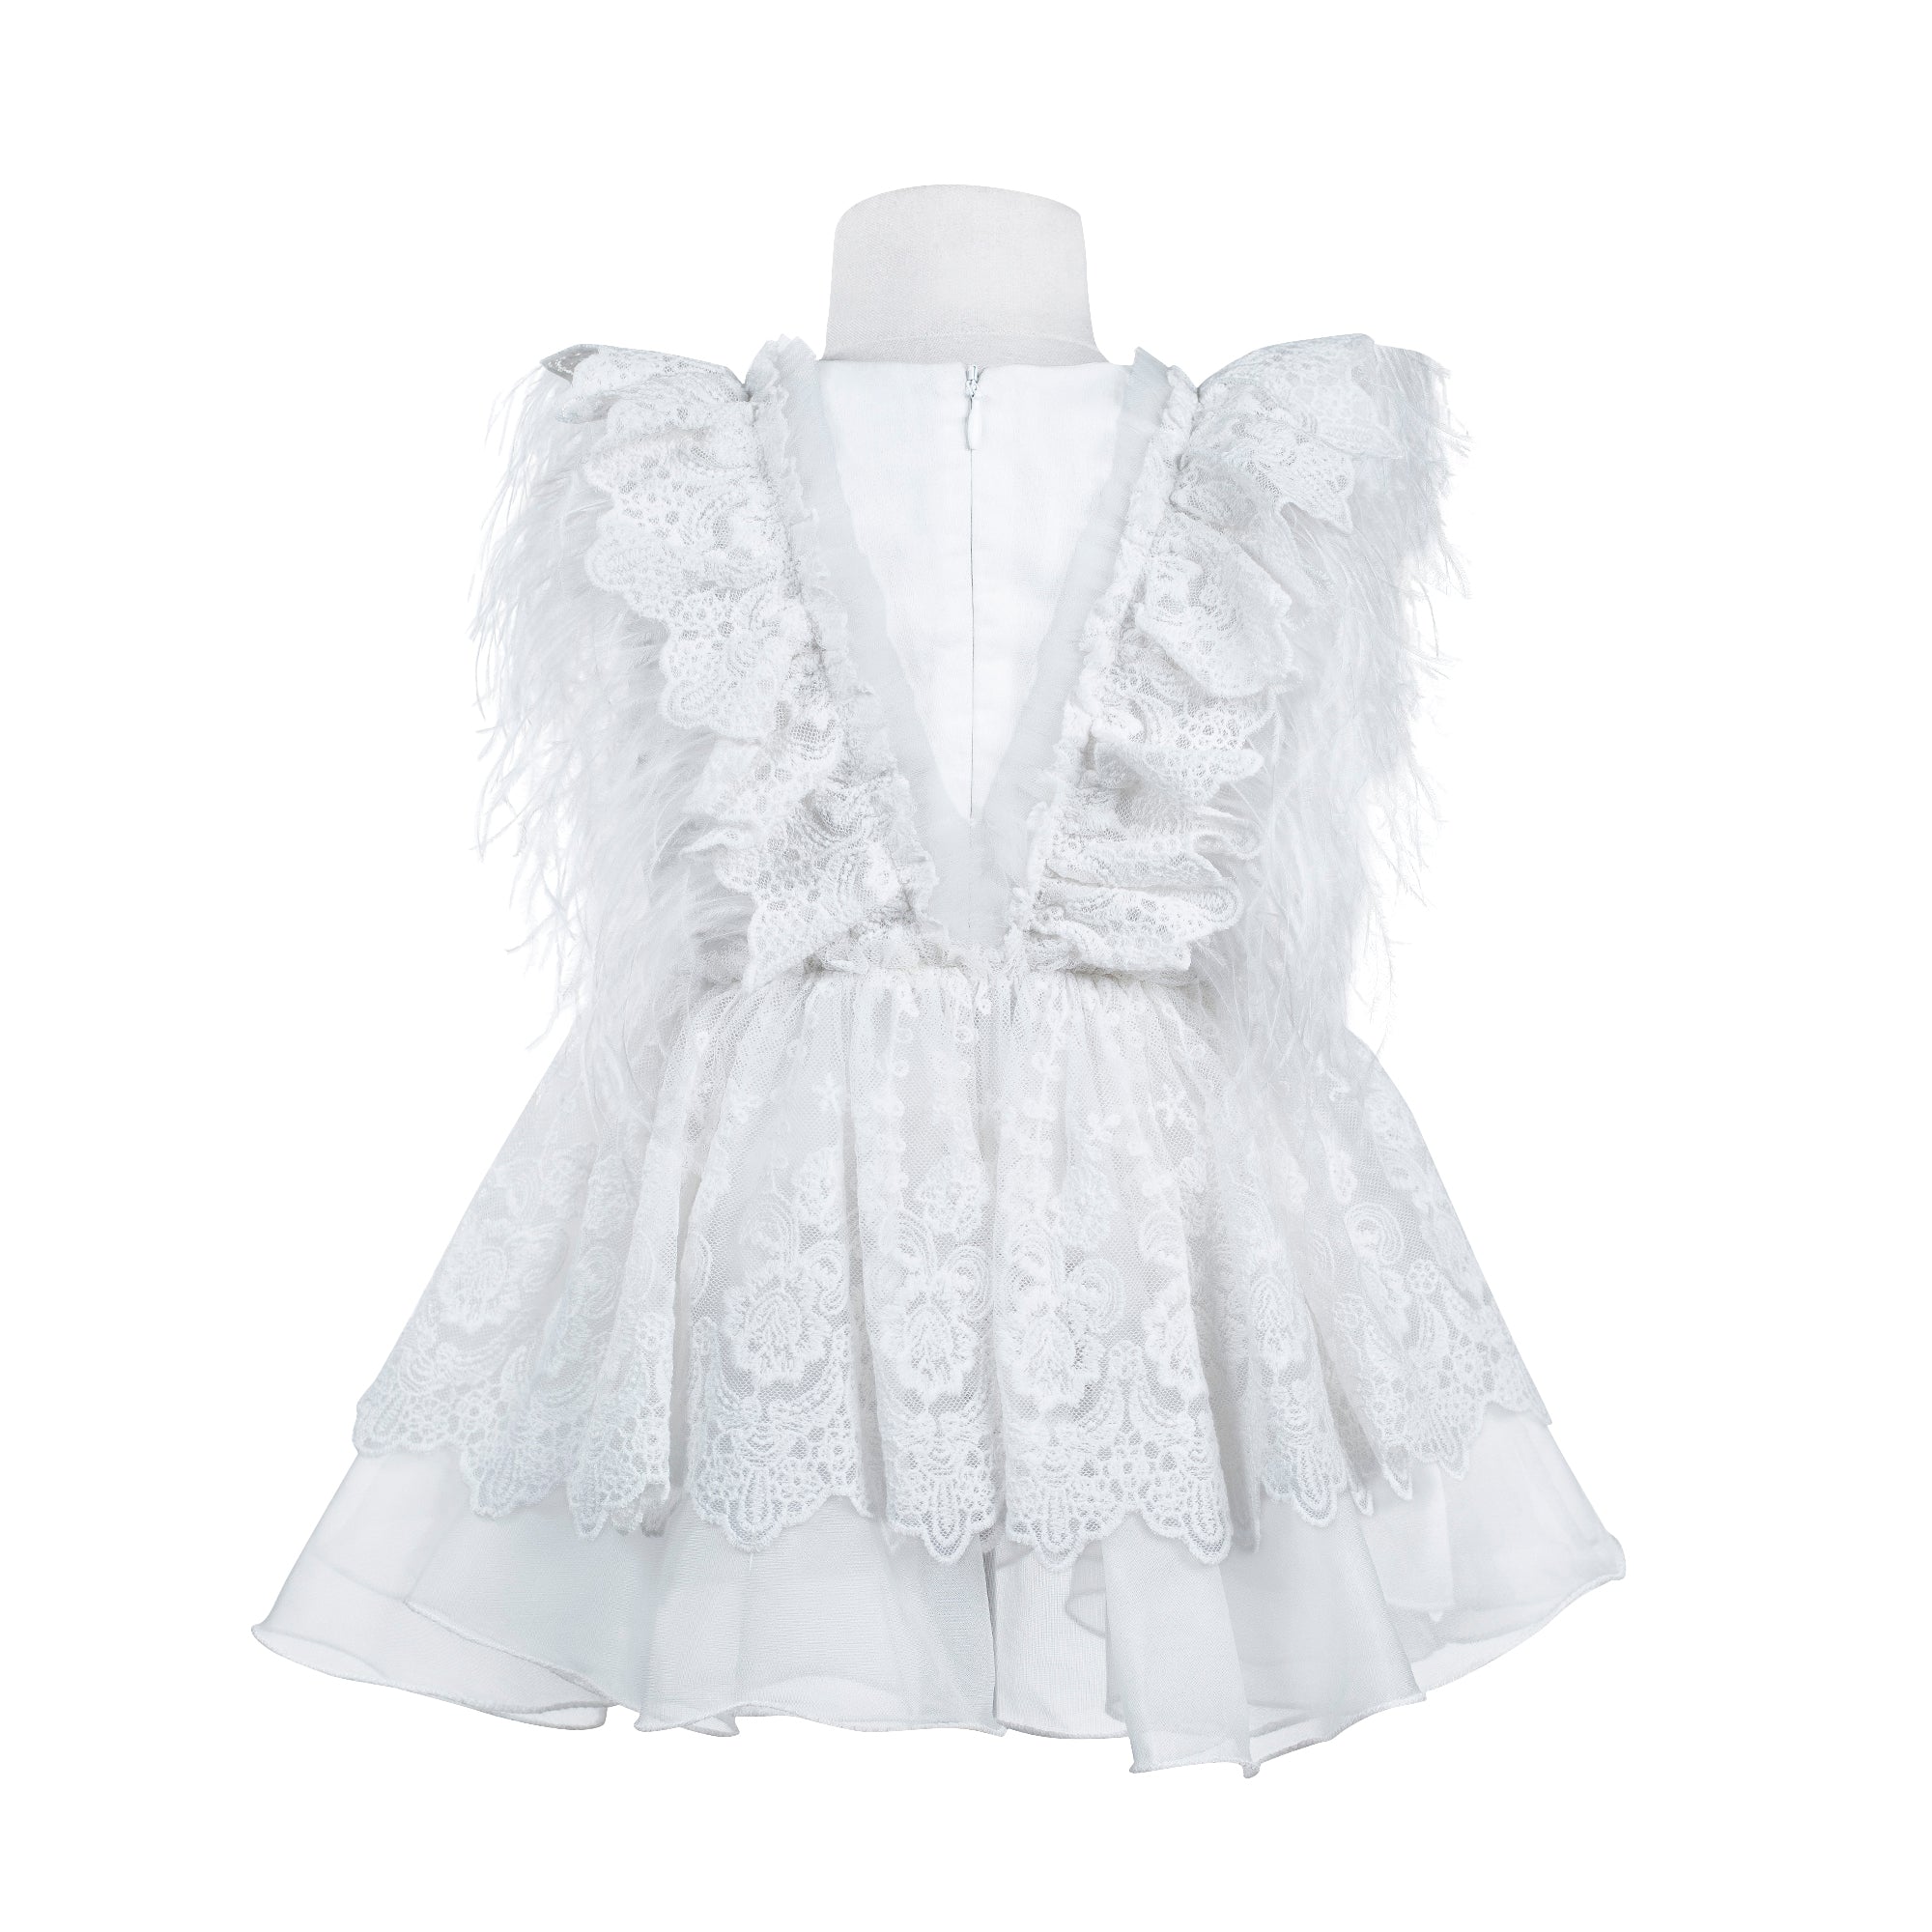 The Feather Fairy Dress (White)